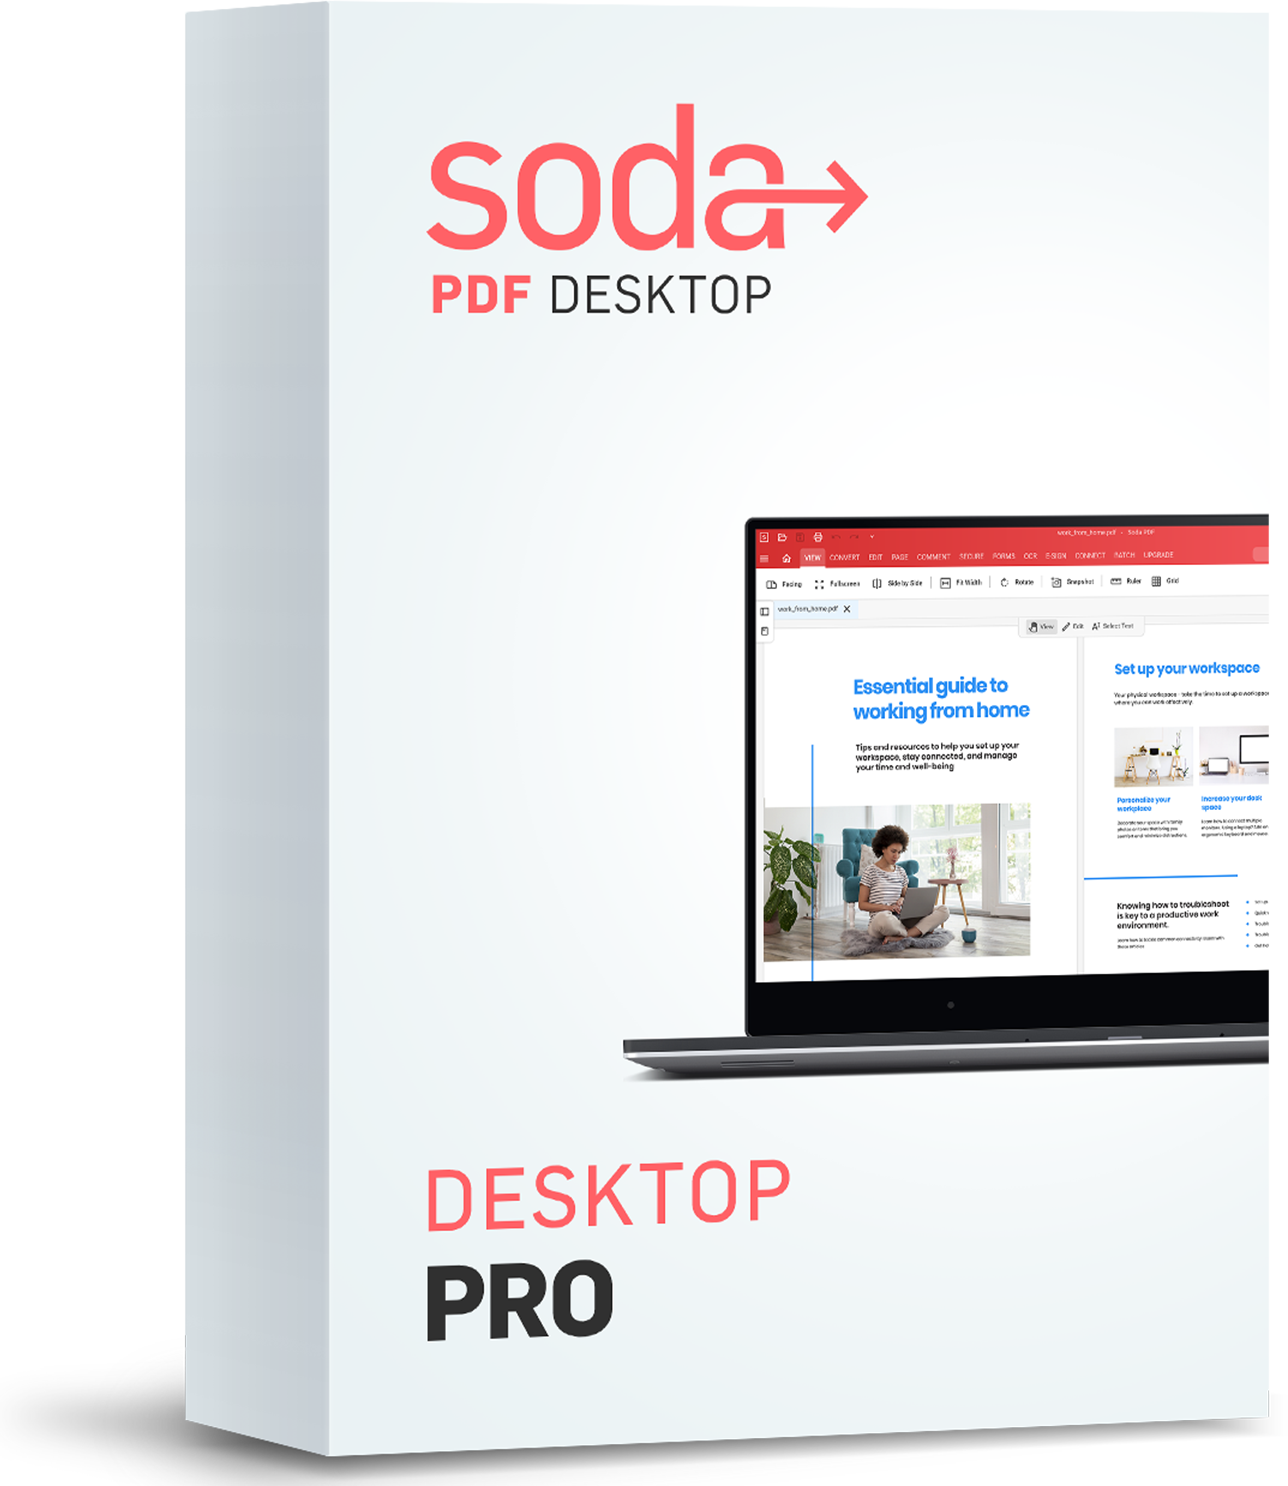 download the new for android Soda PDF Desktop Pro 14.0.351.21216